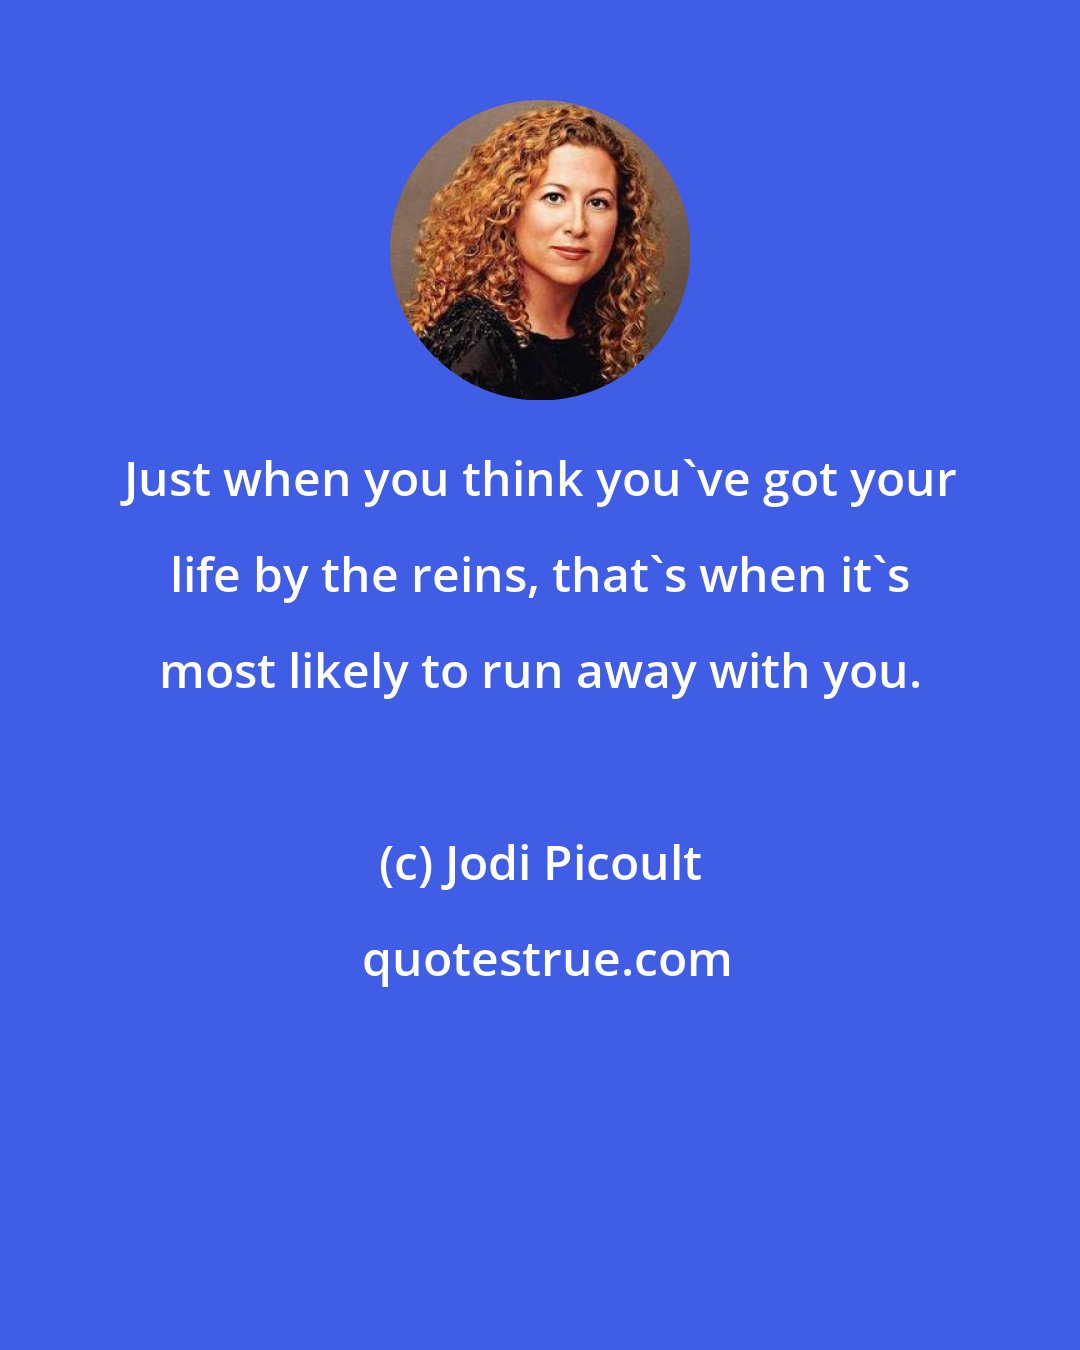 Jodi Picoult: Just when you think you've got your life by the reins, that's when it's most likely to run away with you.